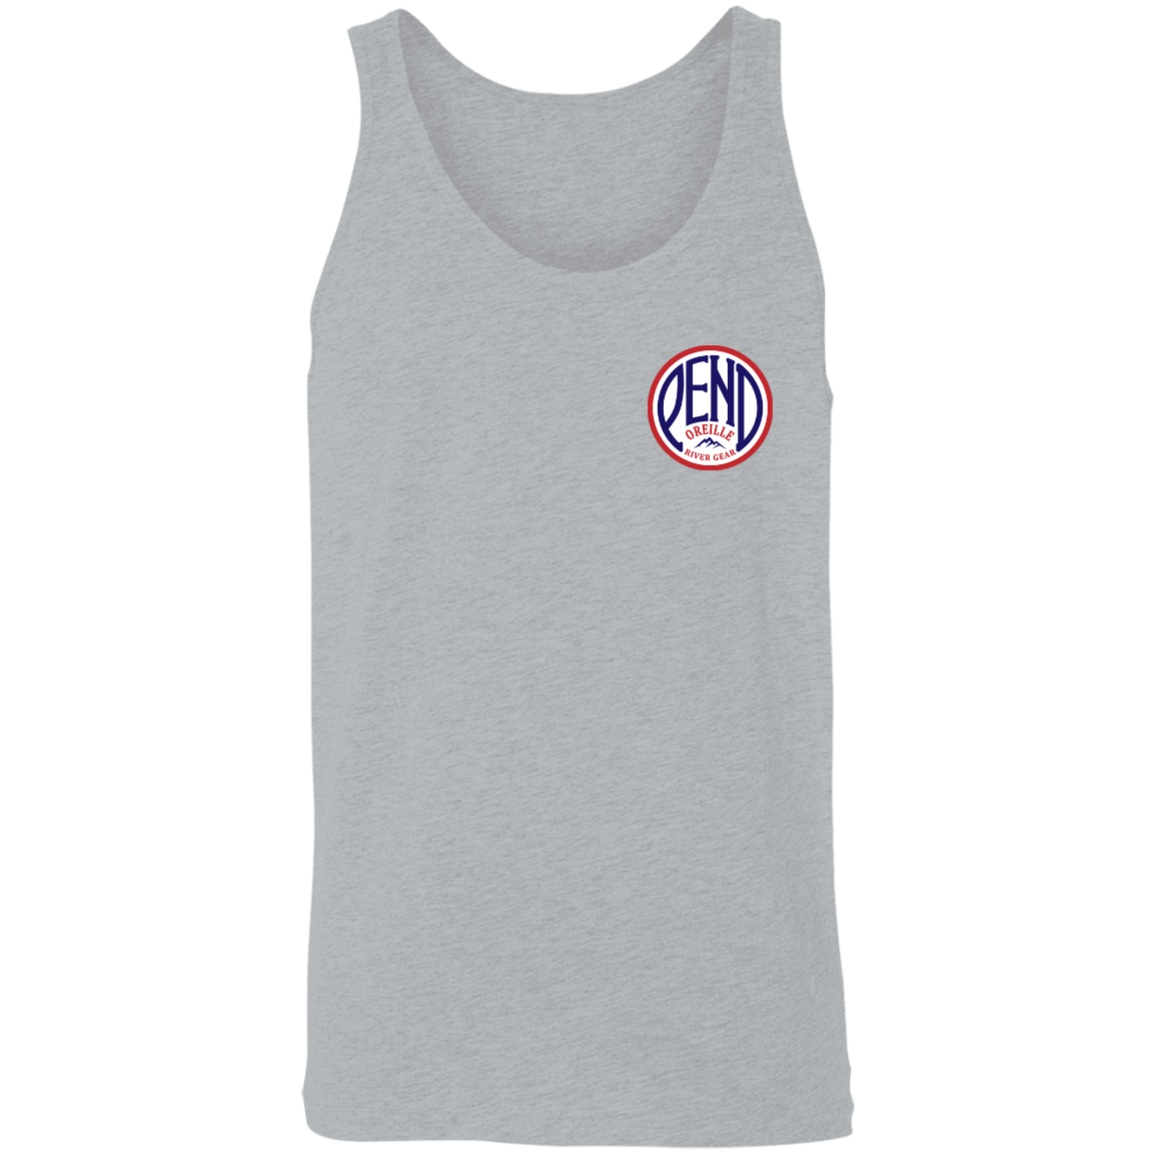 Red White & Pend (on Back) Tank